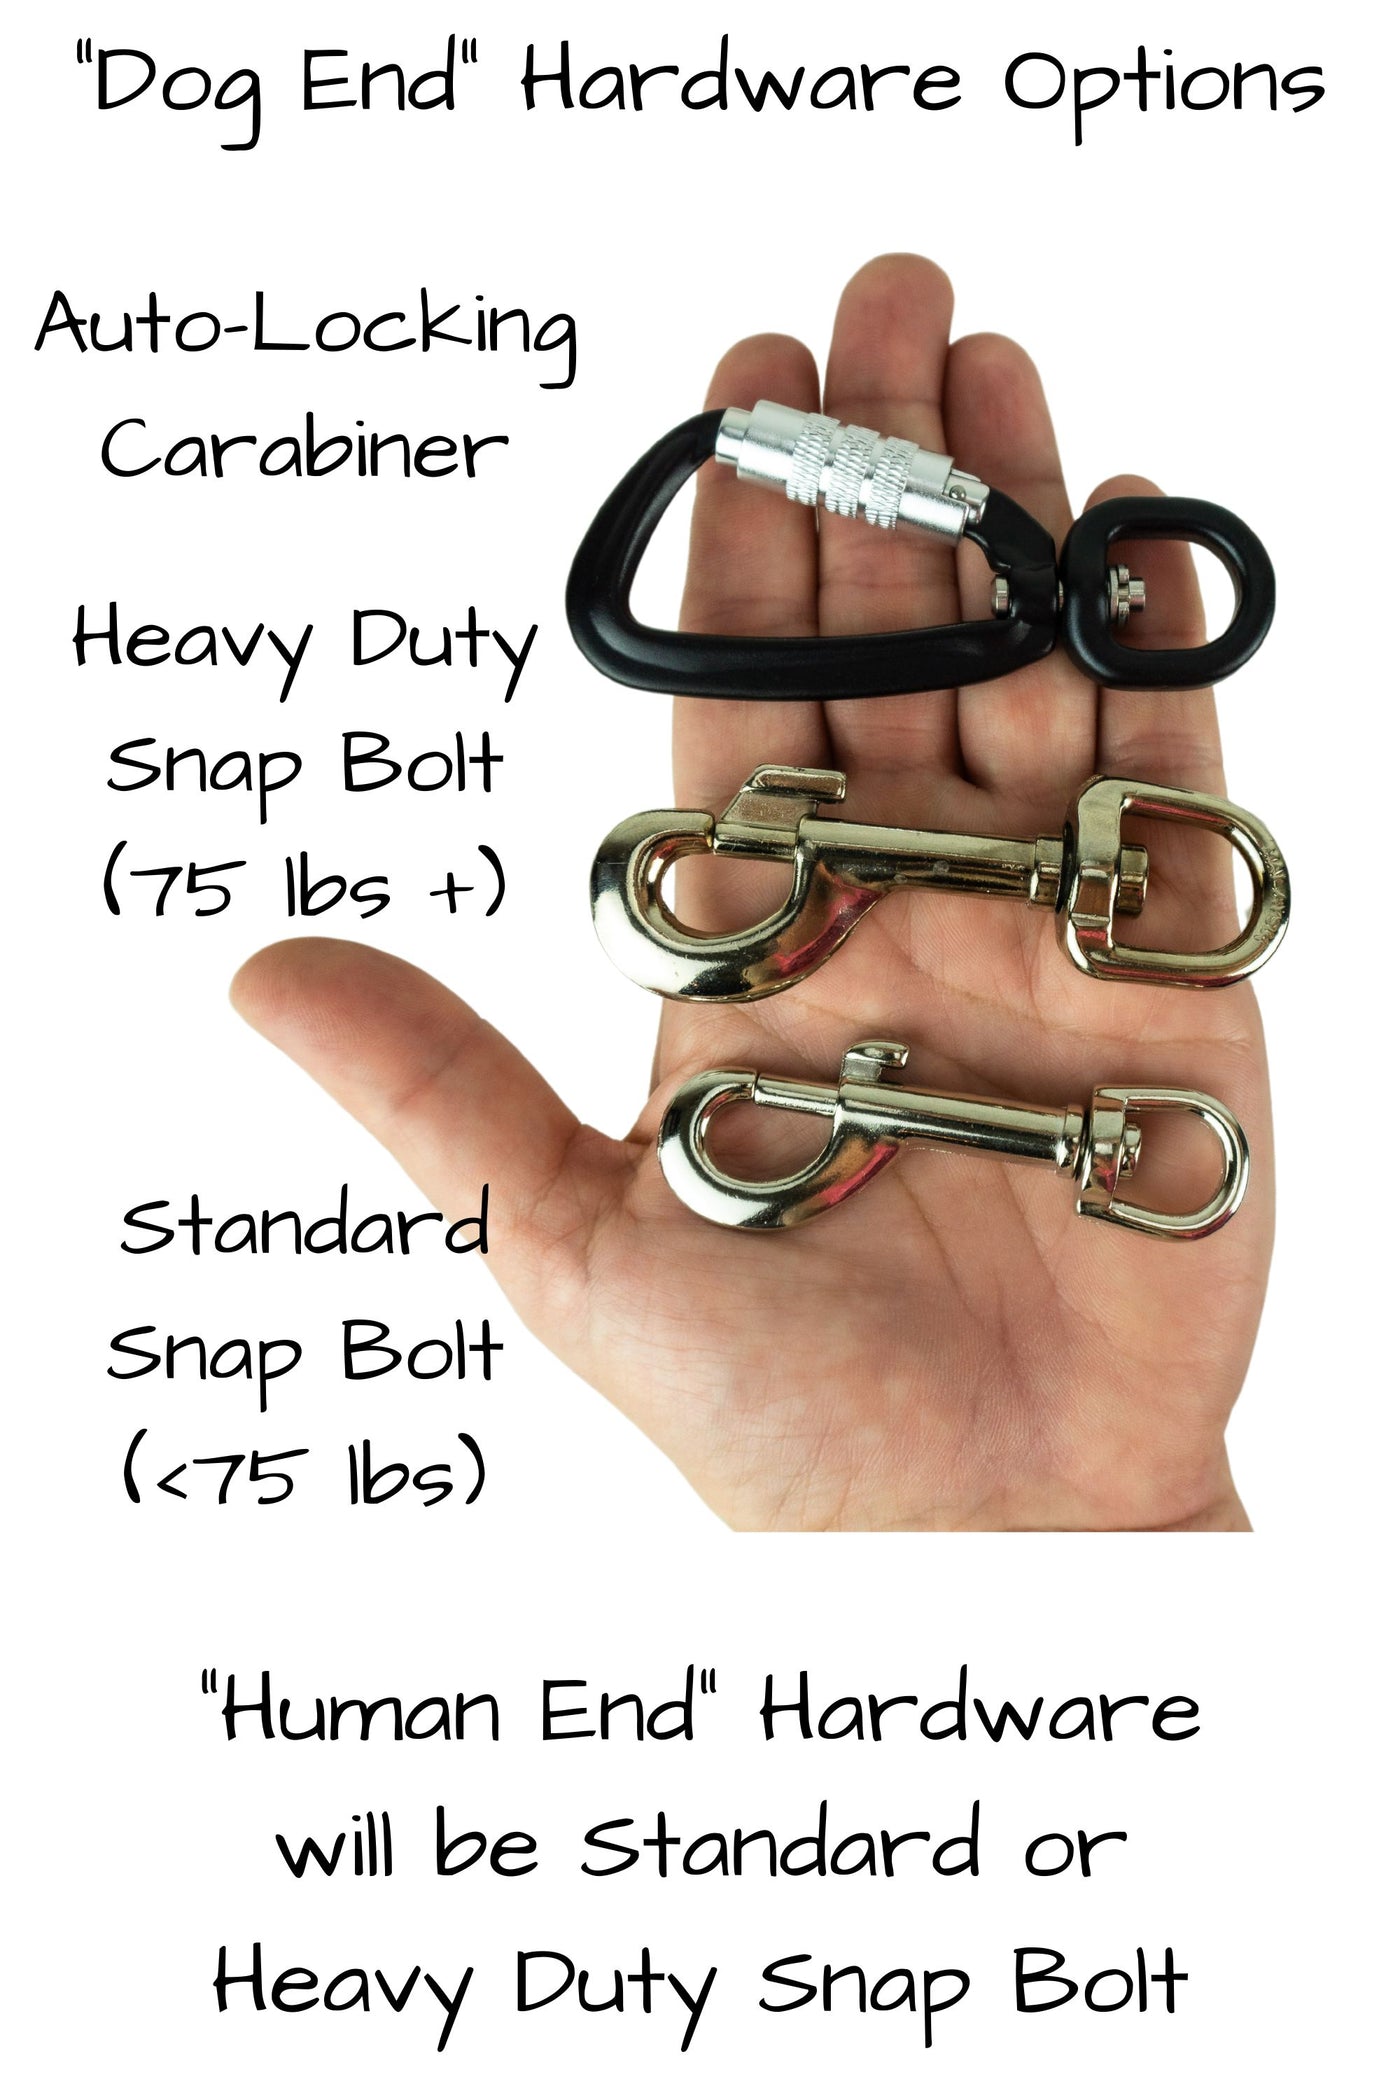 Hardware for paracord leashes is shown in the palm of an adult hand for scale. Hardware options for the dog end of the leash are an auto-locking carabiner suitable for dogs of any weight, a heavy duty snap bolt suitable for dogs over 75 pounds, or a standard snap bolt for dogs under 75 pounds. The human end of the leash will be an appropriate sized standard or heavy duty snap bolt.